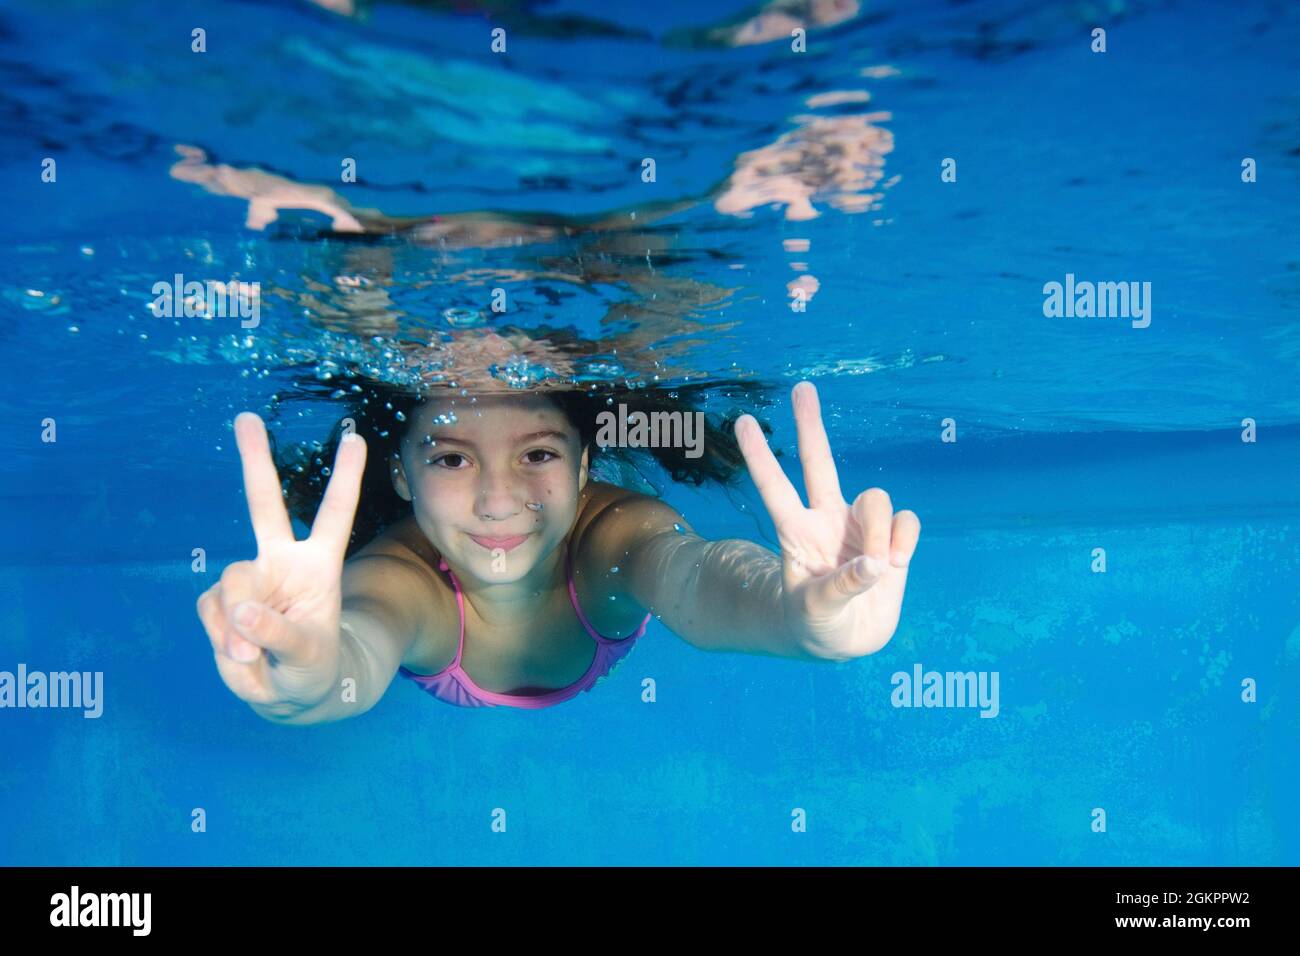 Young girl of 7 swimming underwater gives the Thumbs up sign Stock Photo